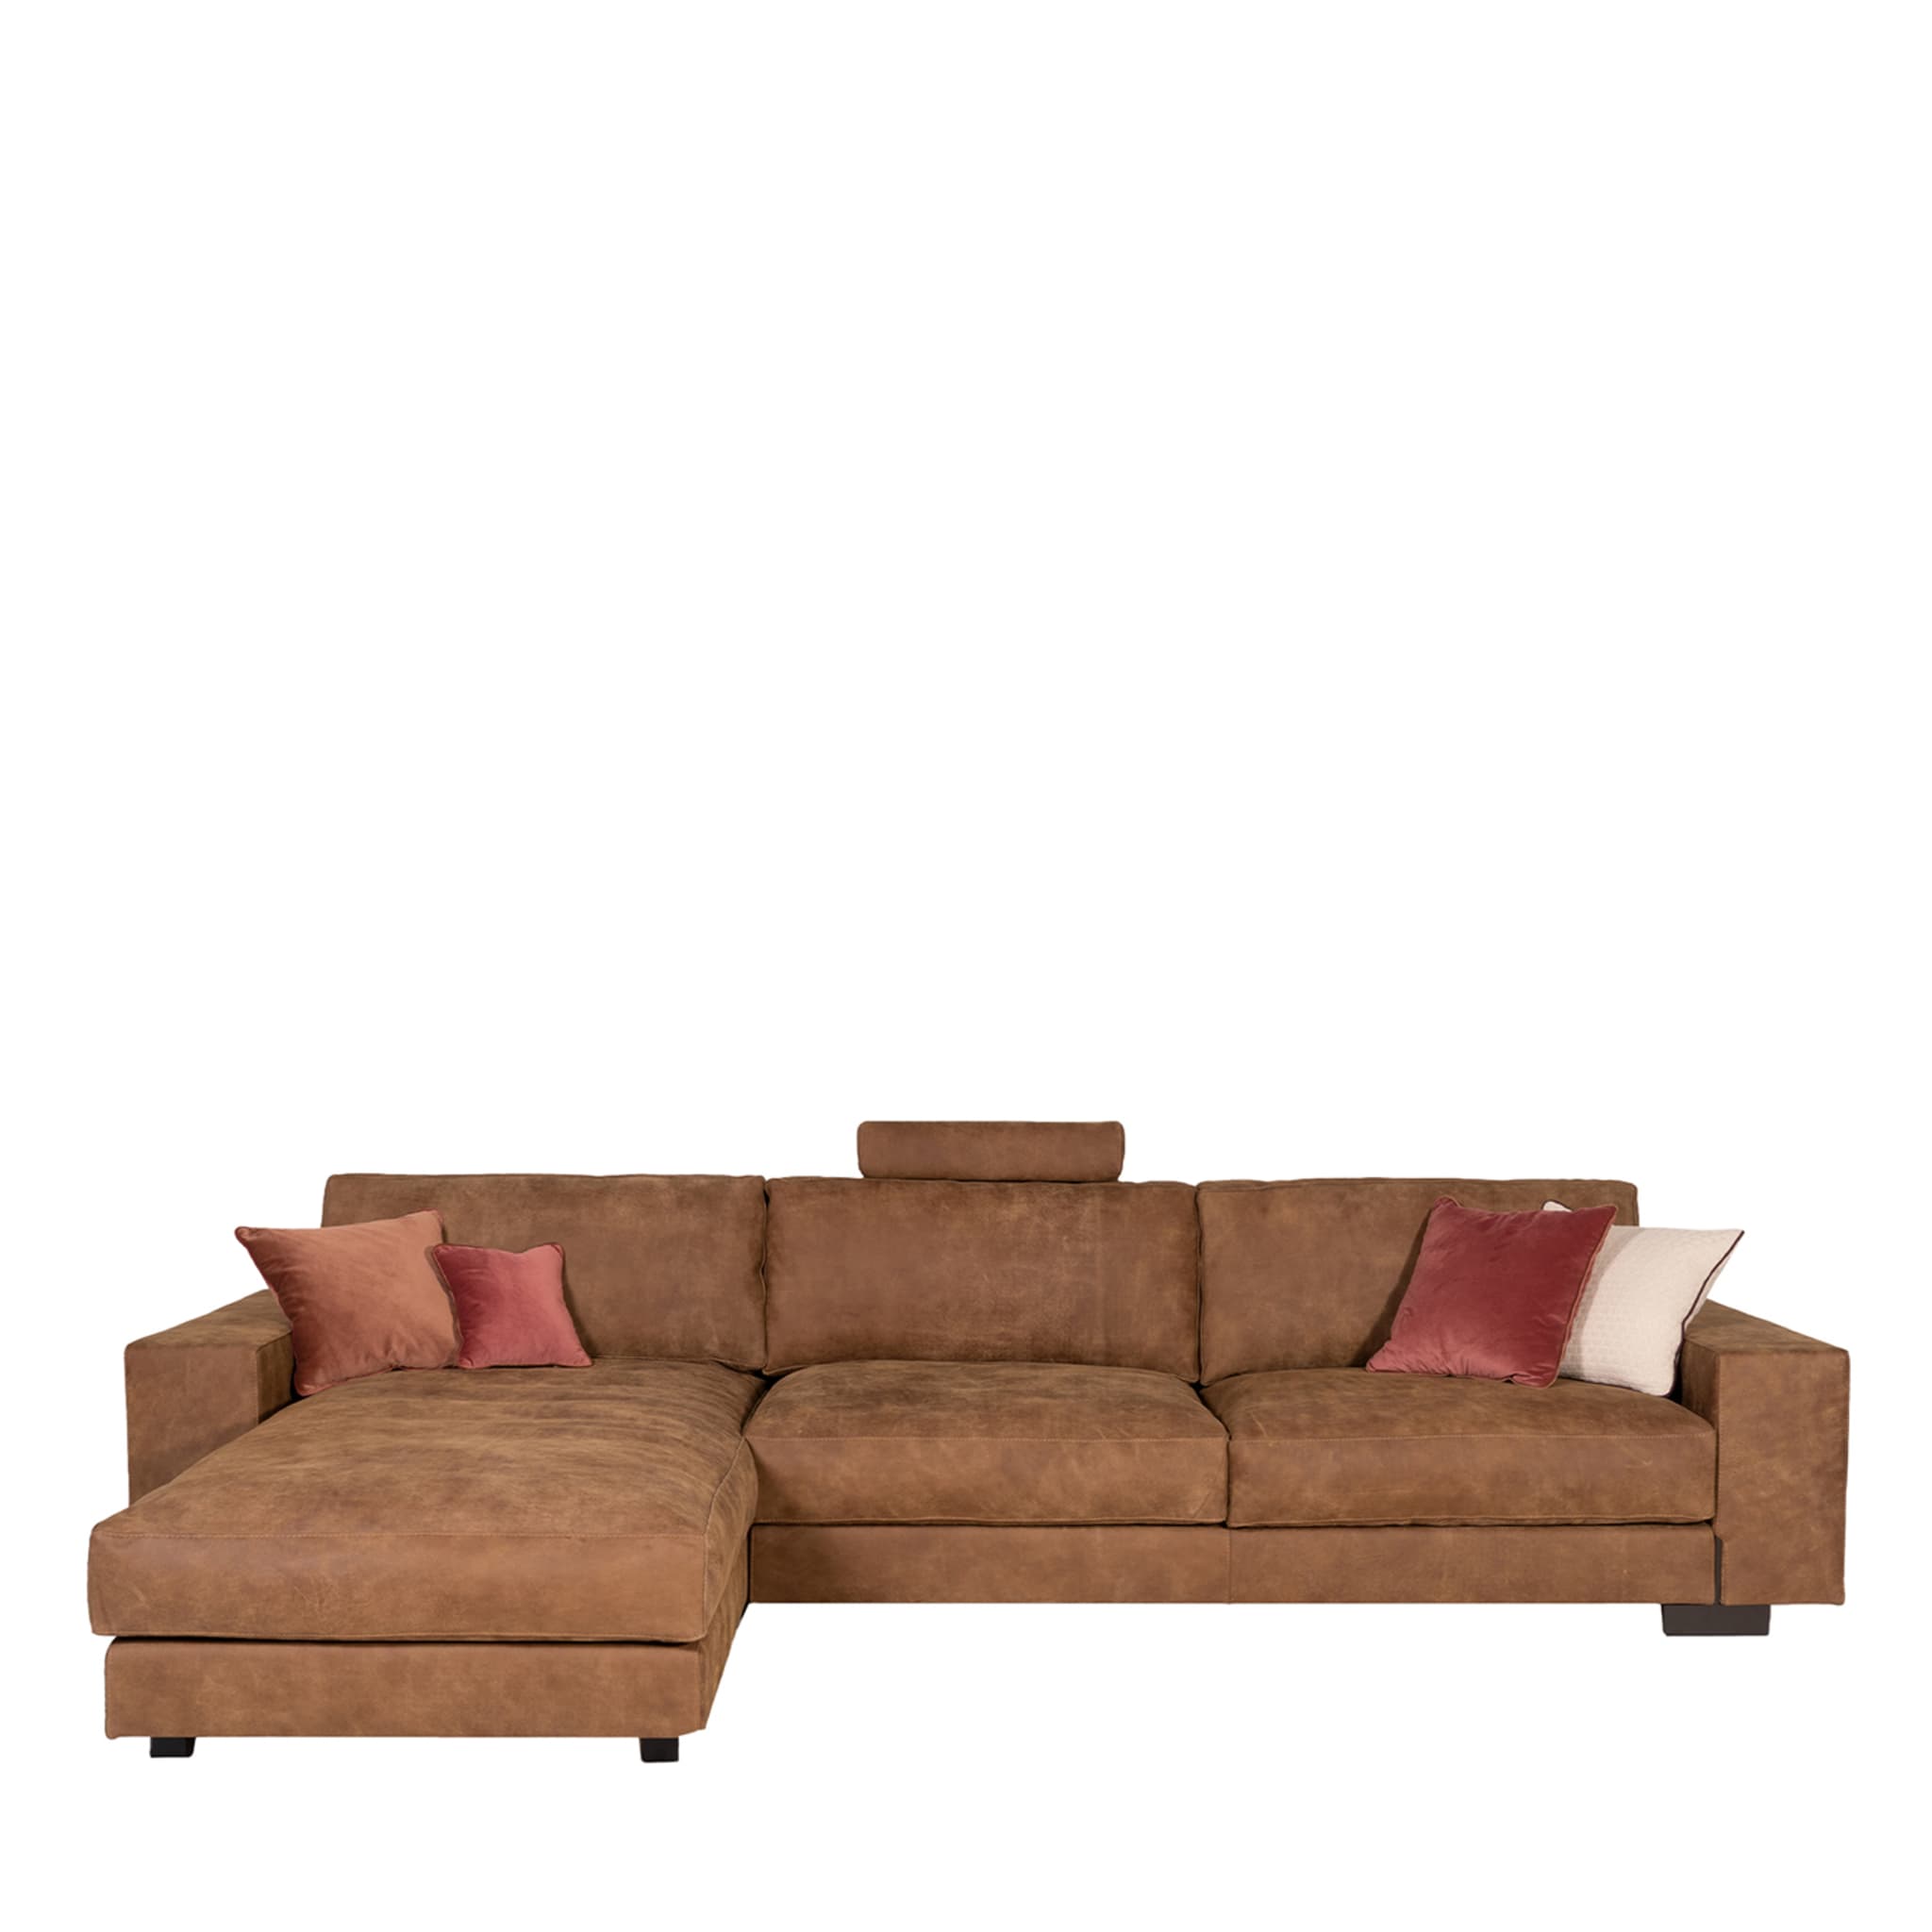 Glam 3-Seater Sofa Chaise Longue by Marco and Giulio Mantellassi - Main view